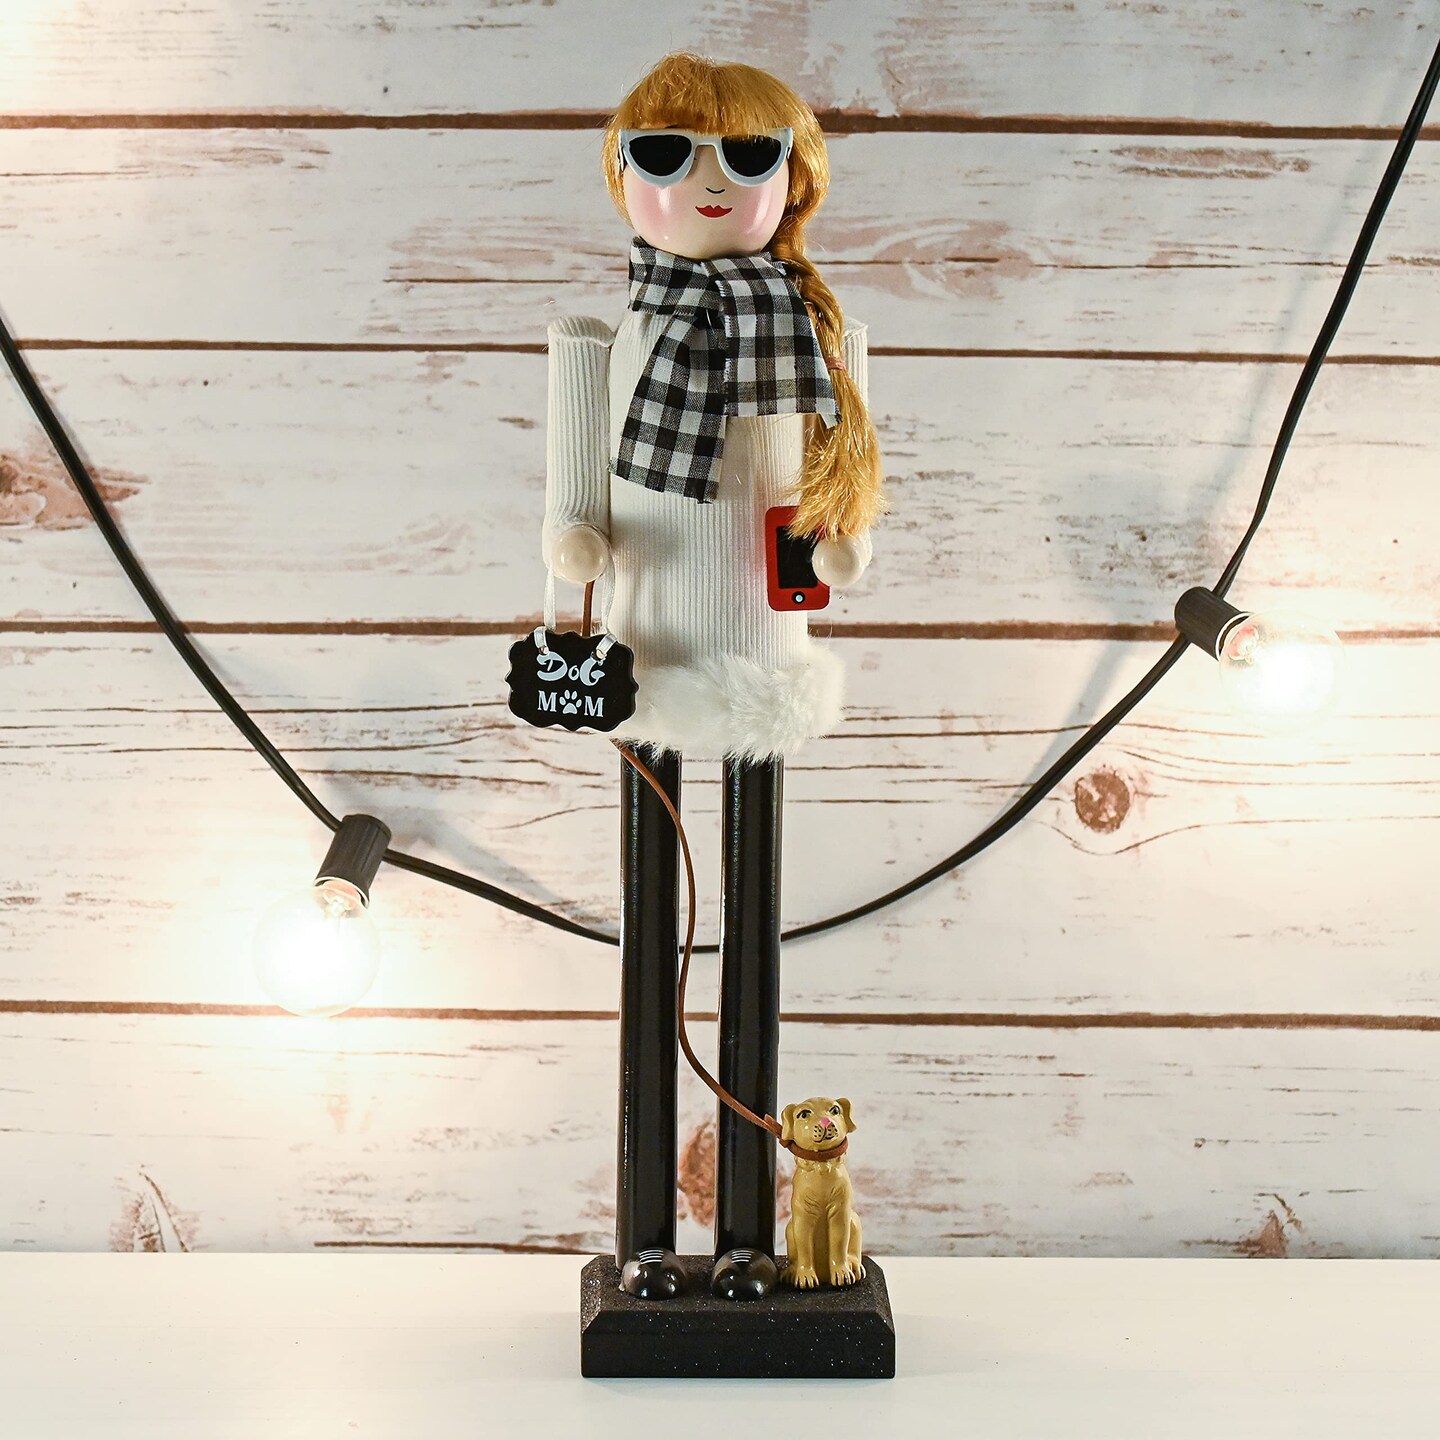 Ornativity Christmas Dog Mom Nutcracker &#x2013; White and Black Wooden Nutcracker Woman with Dog on Leash and a Smartphone in Hand Xmas Themed Holiday Nut Cracker Doll Figure Decorations